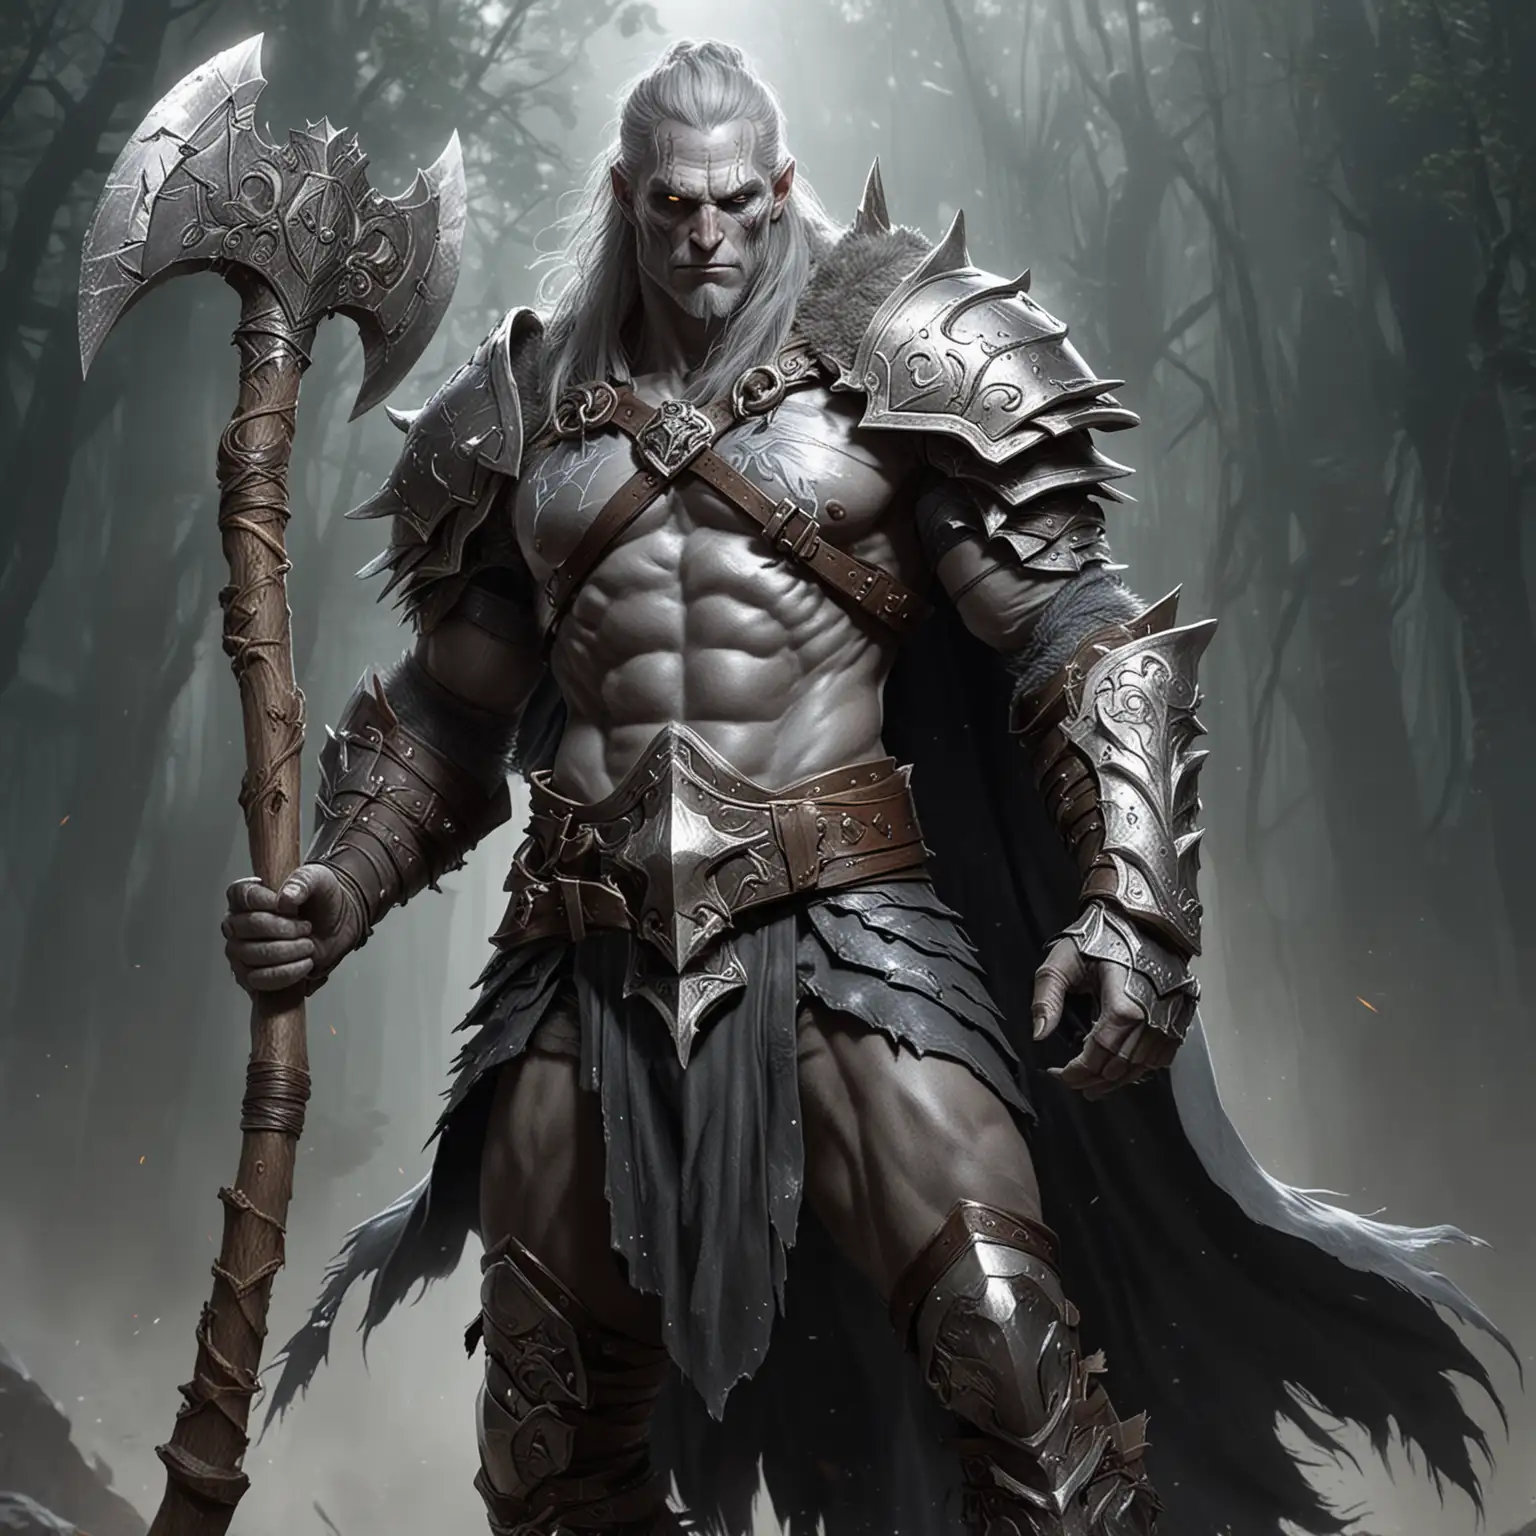 Grey Skinned Half Giant in Hide Armor with Magical Silver Great Axe